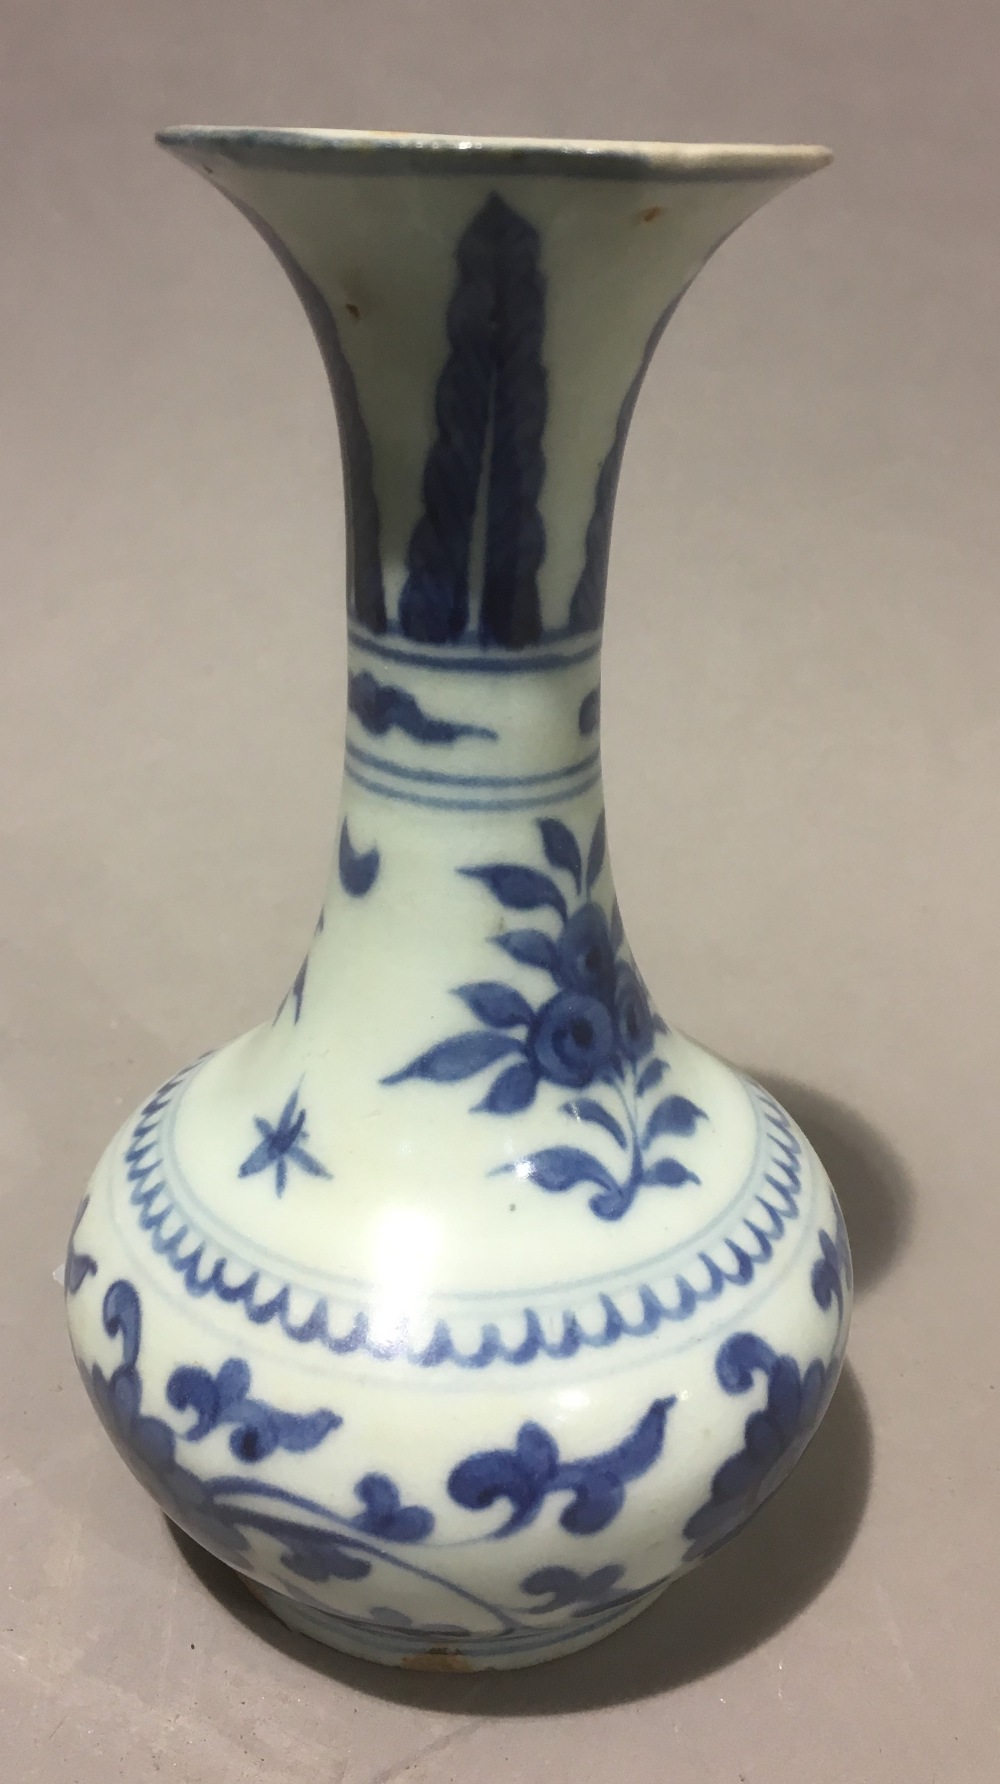 A Chinese blue and white porcelain baluster vase, decorated with floral sprays and lotus strapwork. - Image 3 of 7